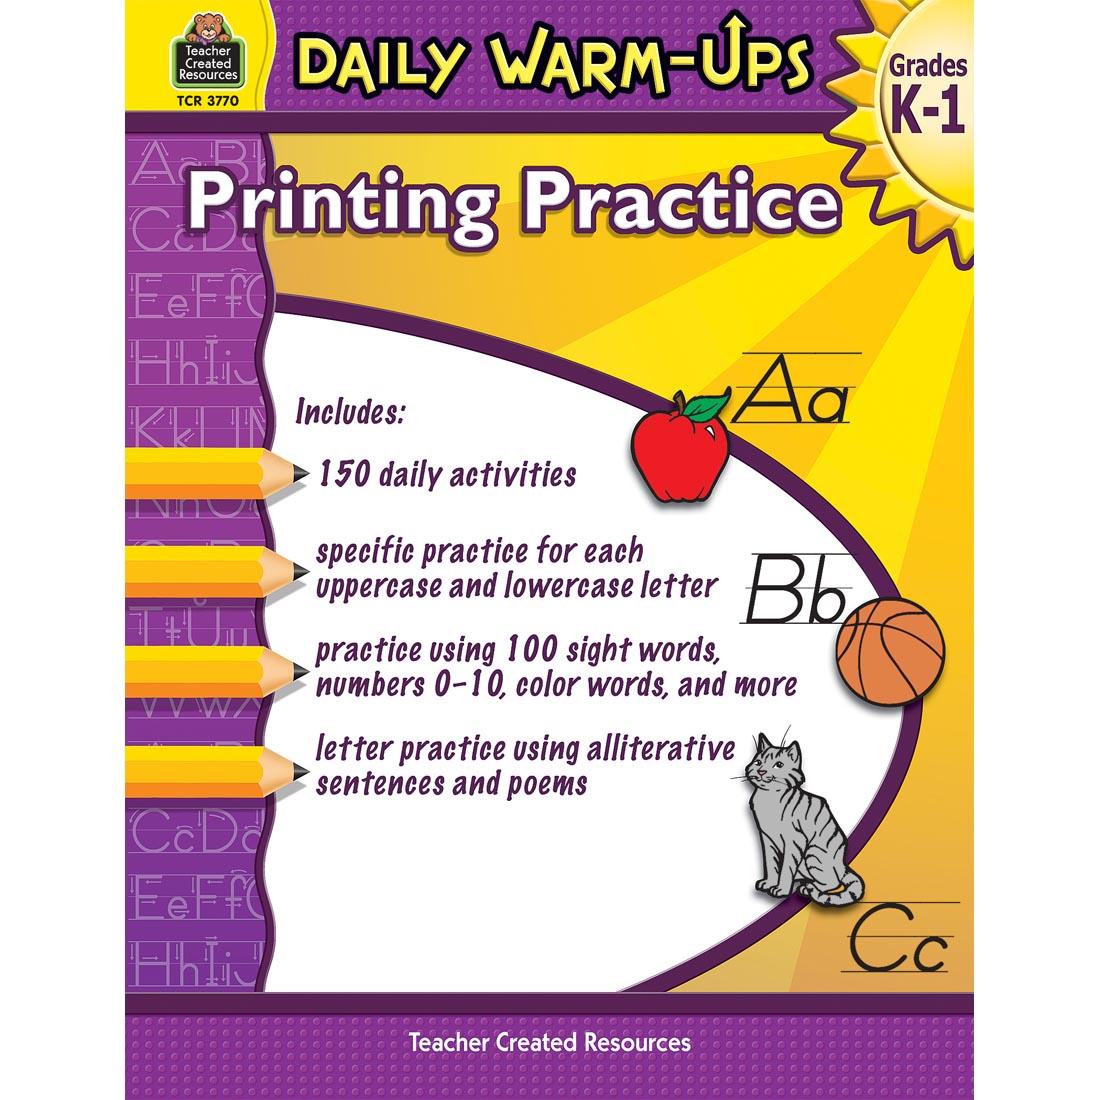 Printing Practice Daily Warm-Ups Book